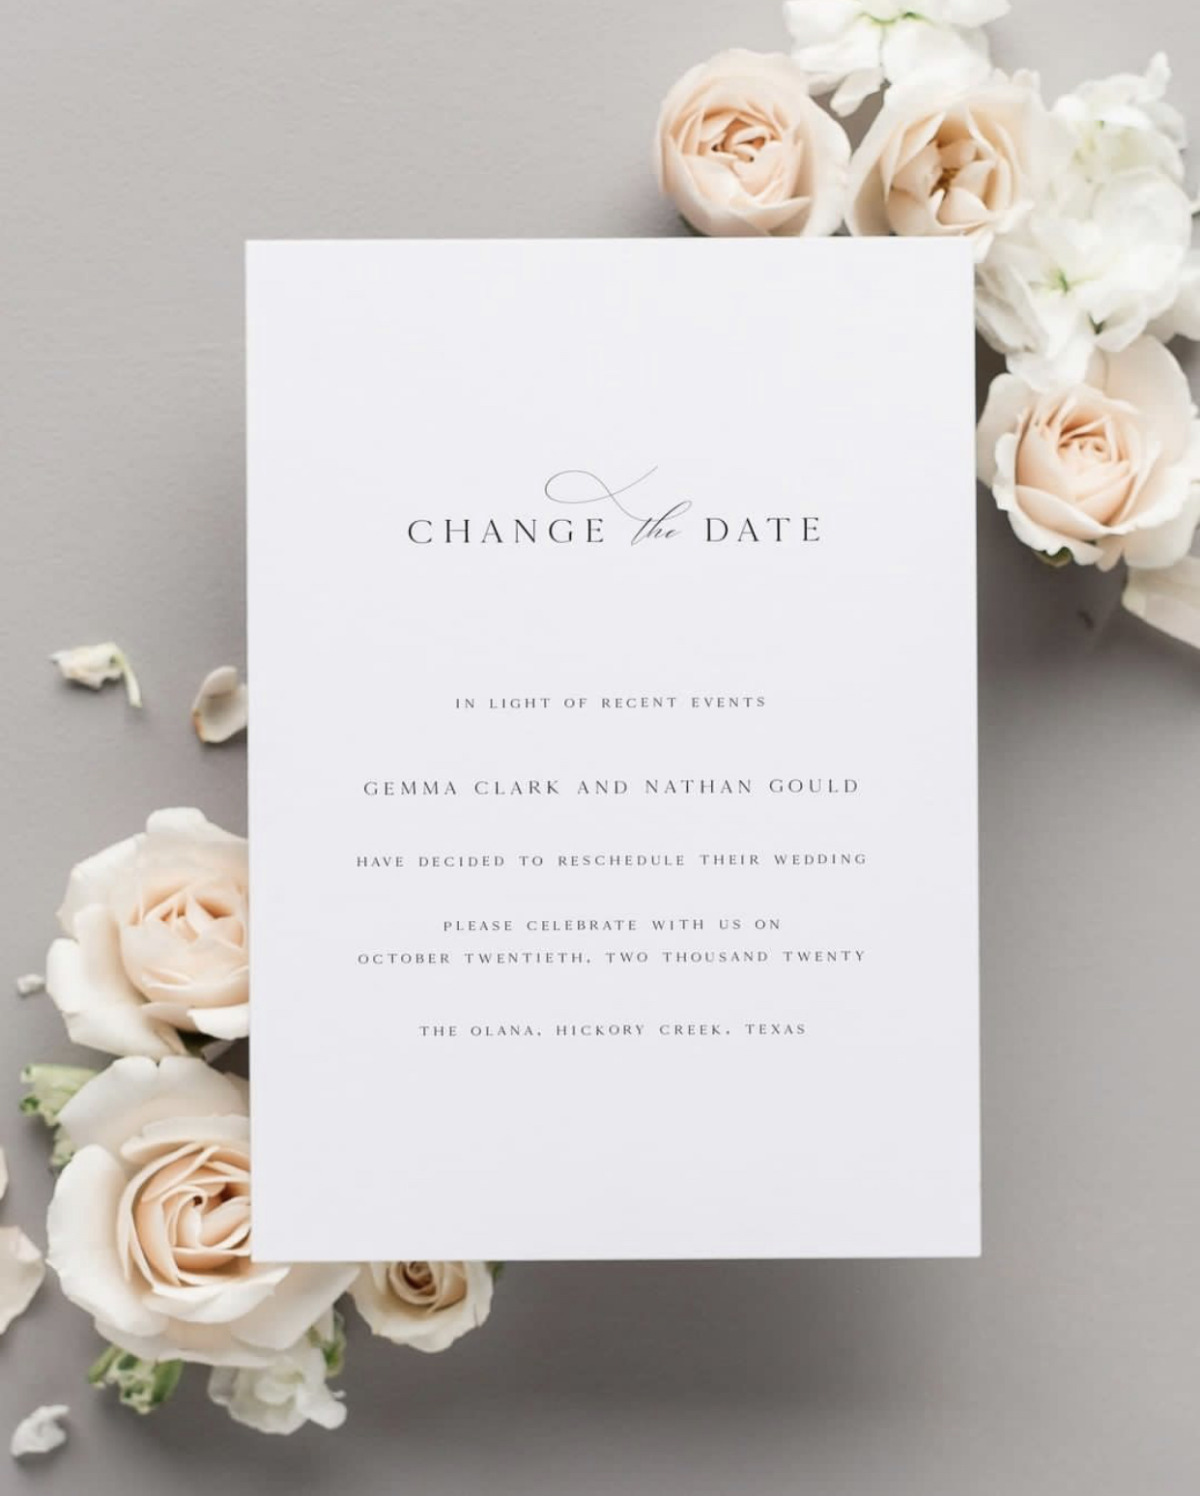 3 Ways to Let Guests Know You've Postponed Your Wedding